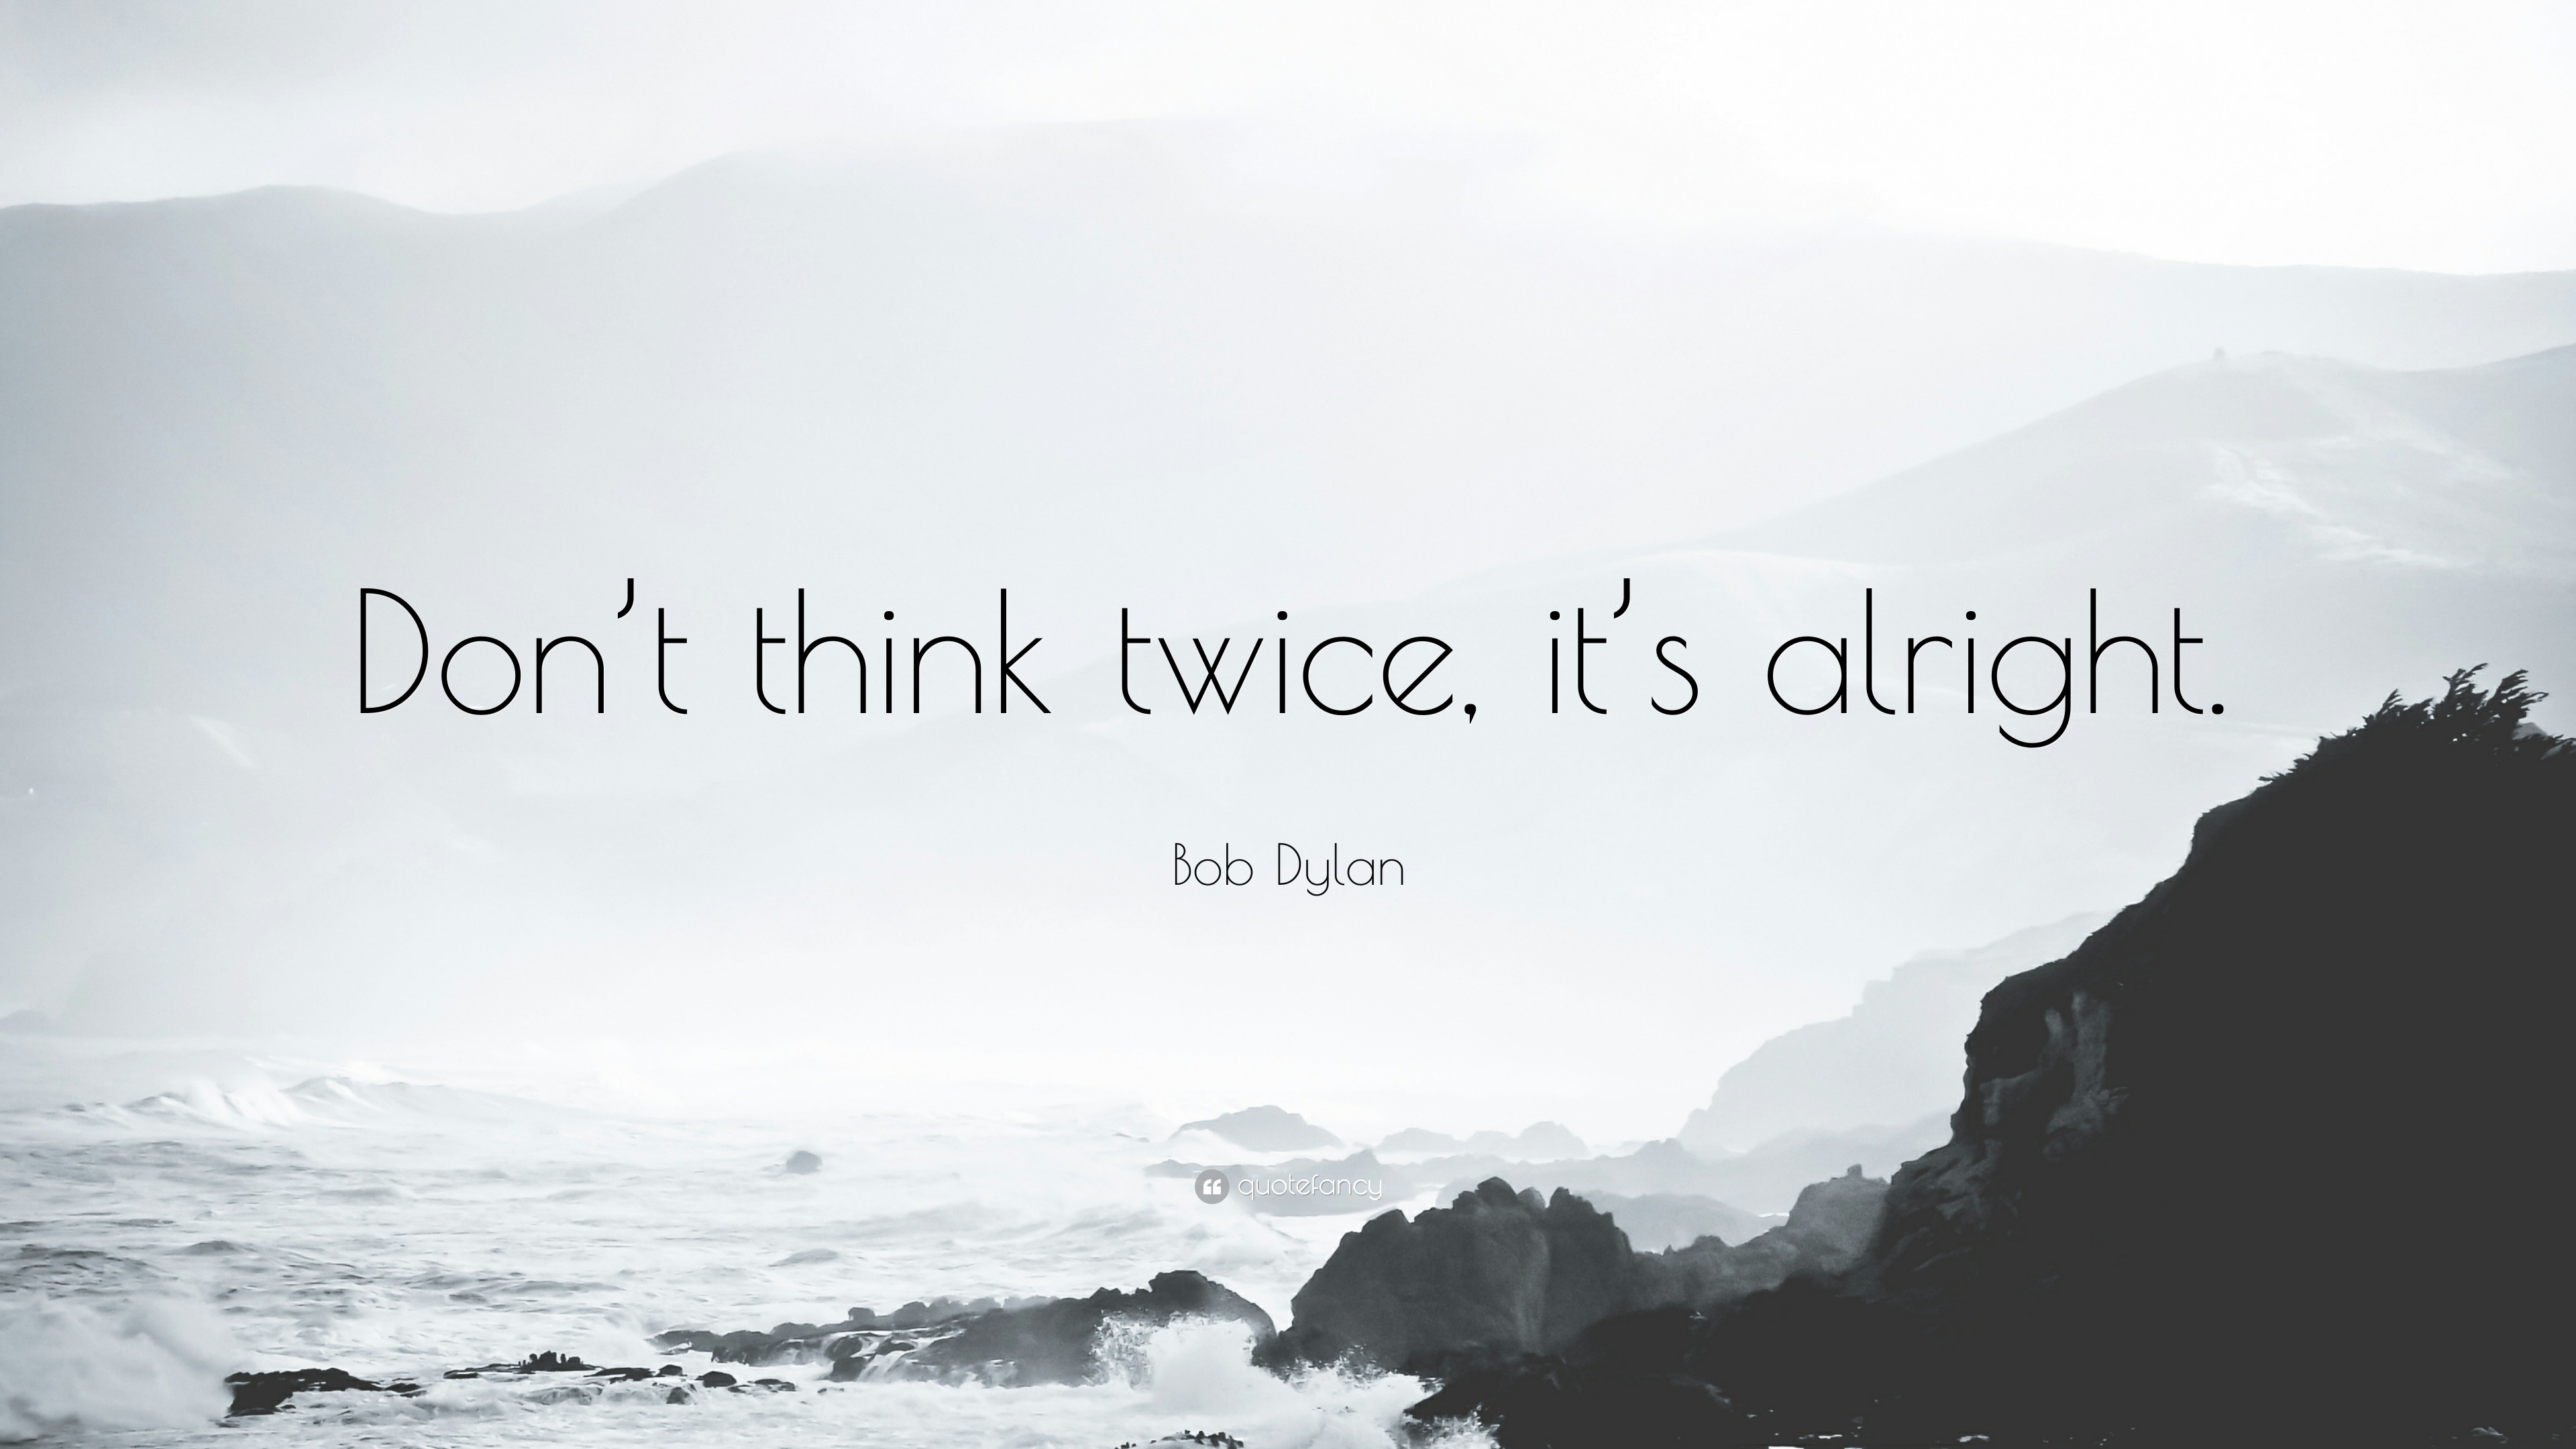 https://quotefancy.com/media/wallpaper/3840x2160/1727676-Bob-Dylan-Quote-Don-t-think-twice-it-s-alright.jpg